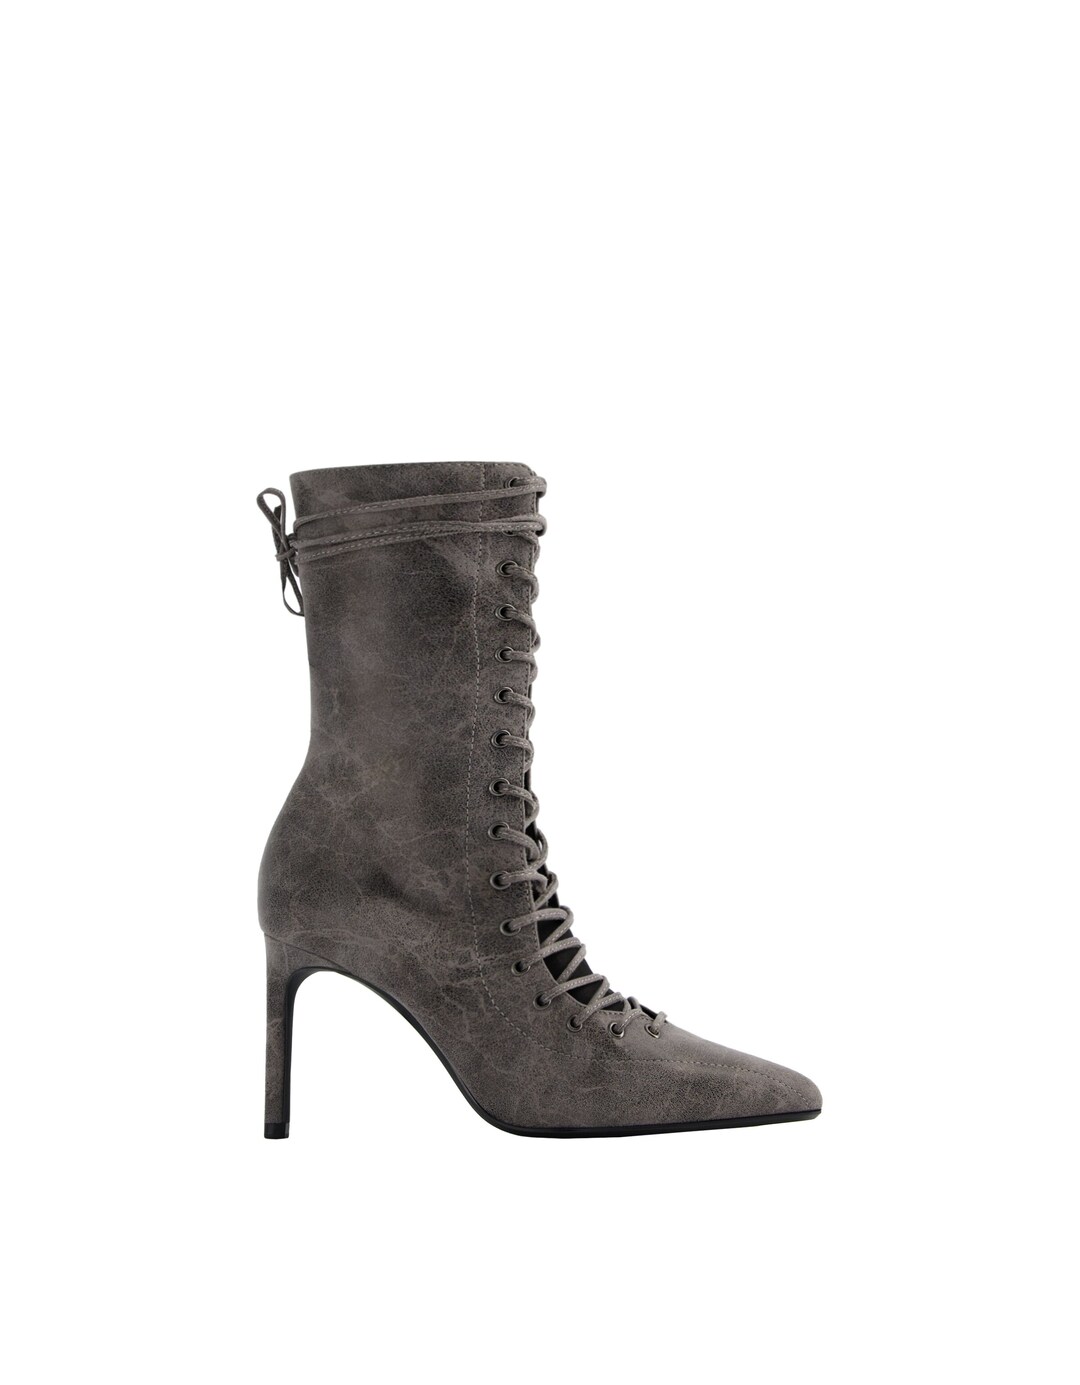 Lace-up stiletto heel zip ankle boots